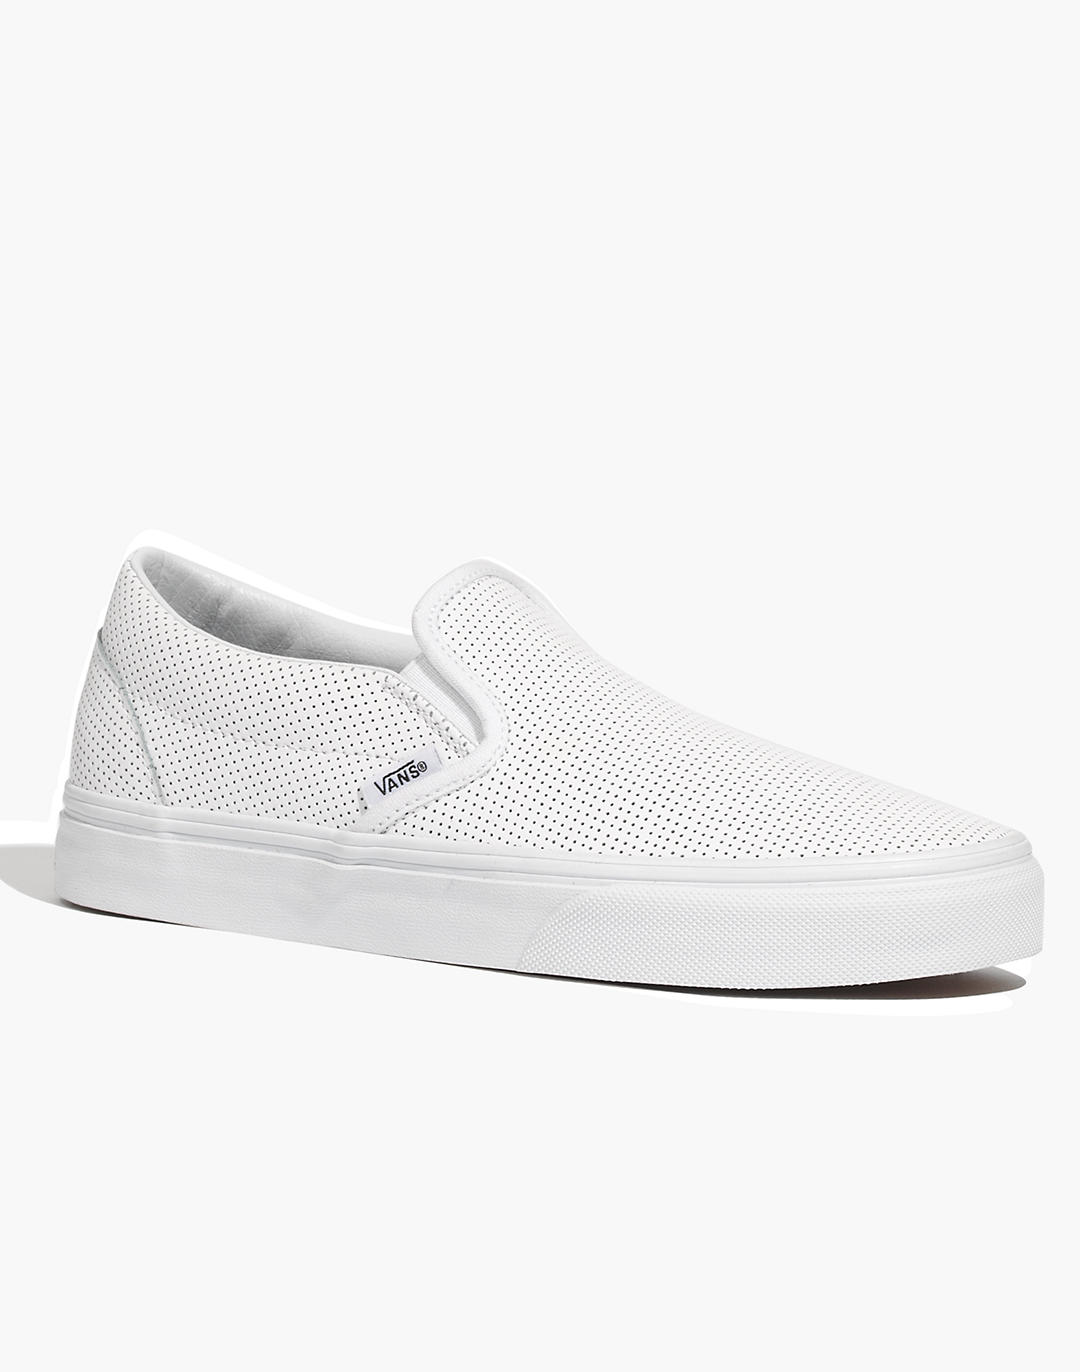 Vans® Classic Slip-Ons in Perforated Leather طباخ كويتي